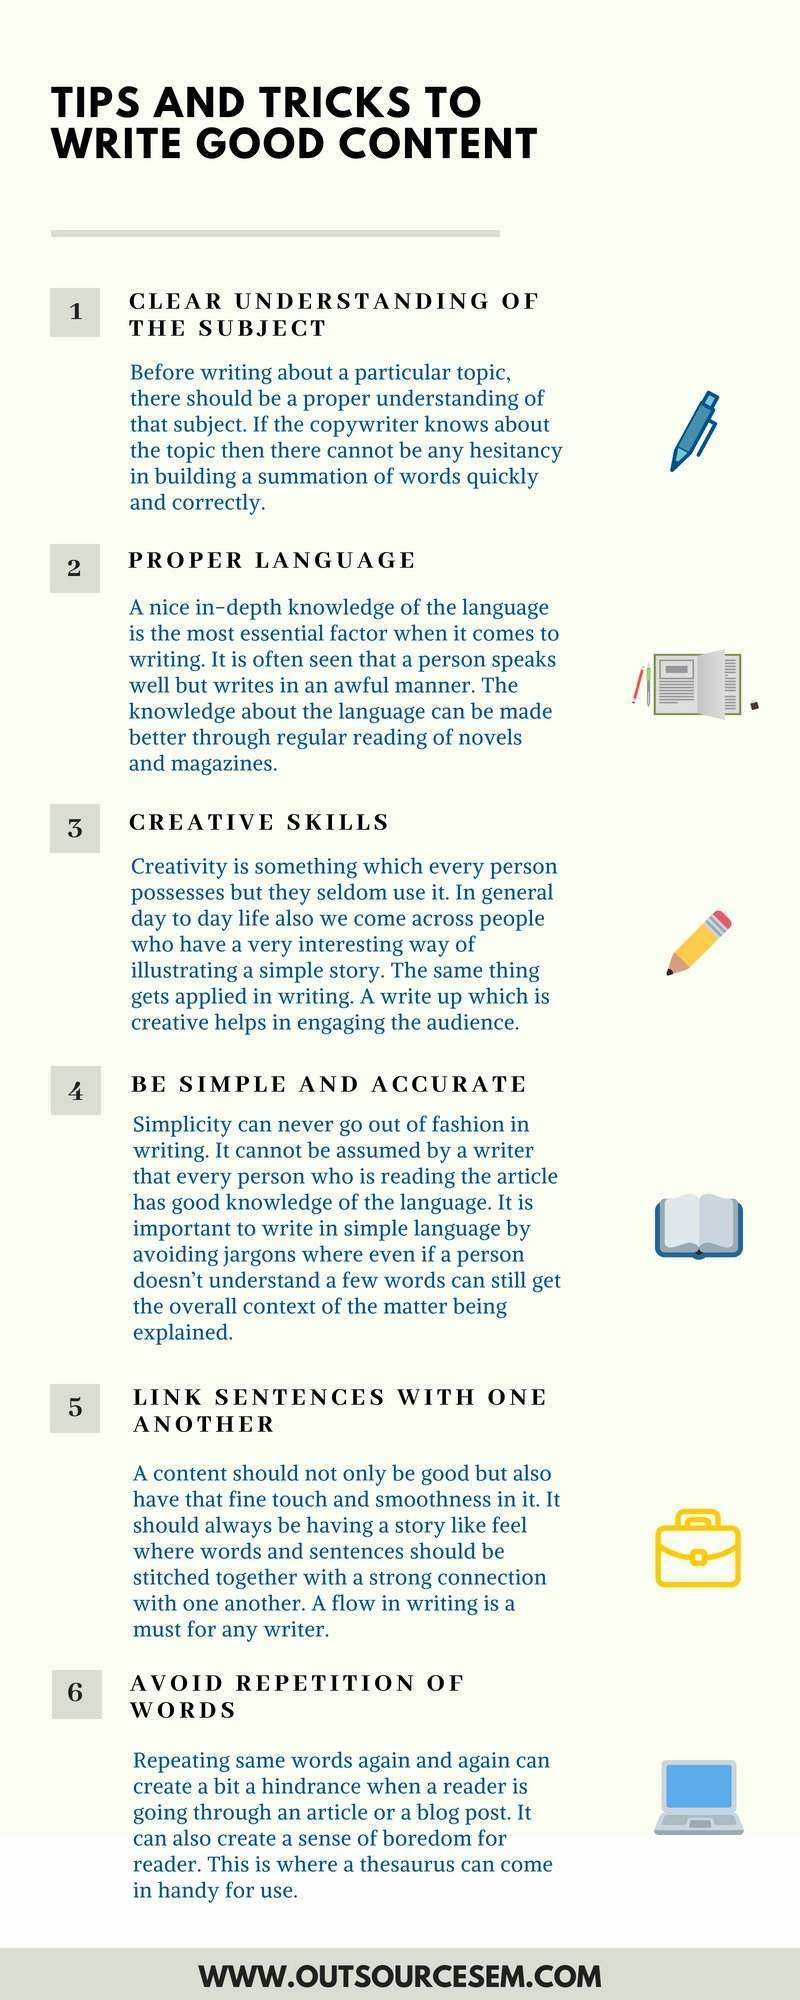 Tips and tricks to write good content infographic